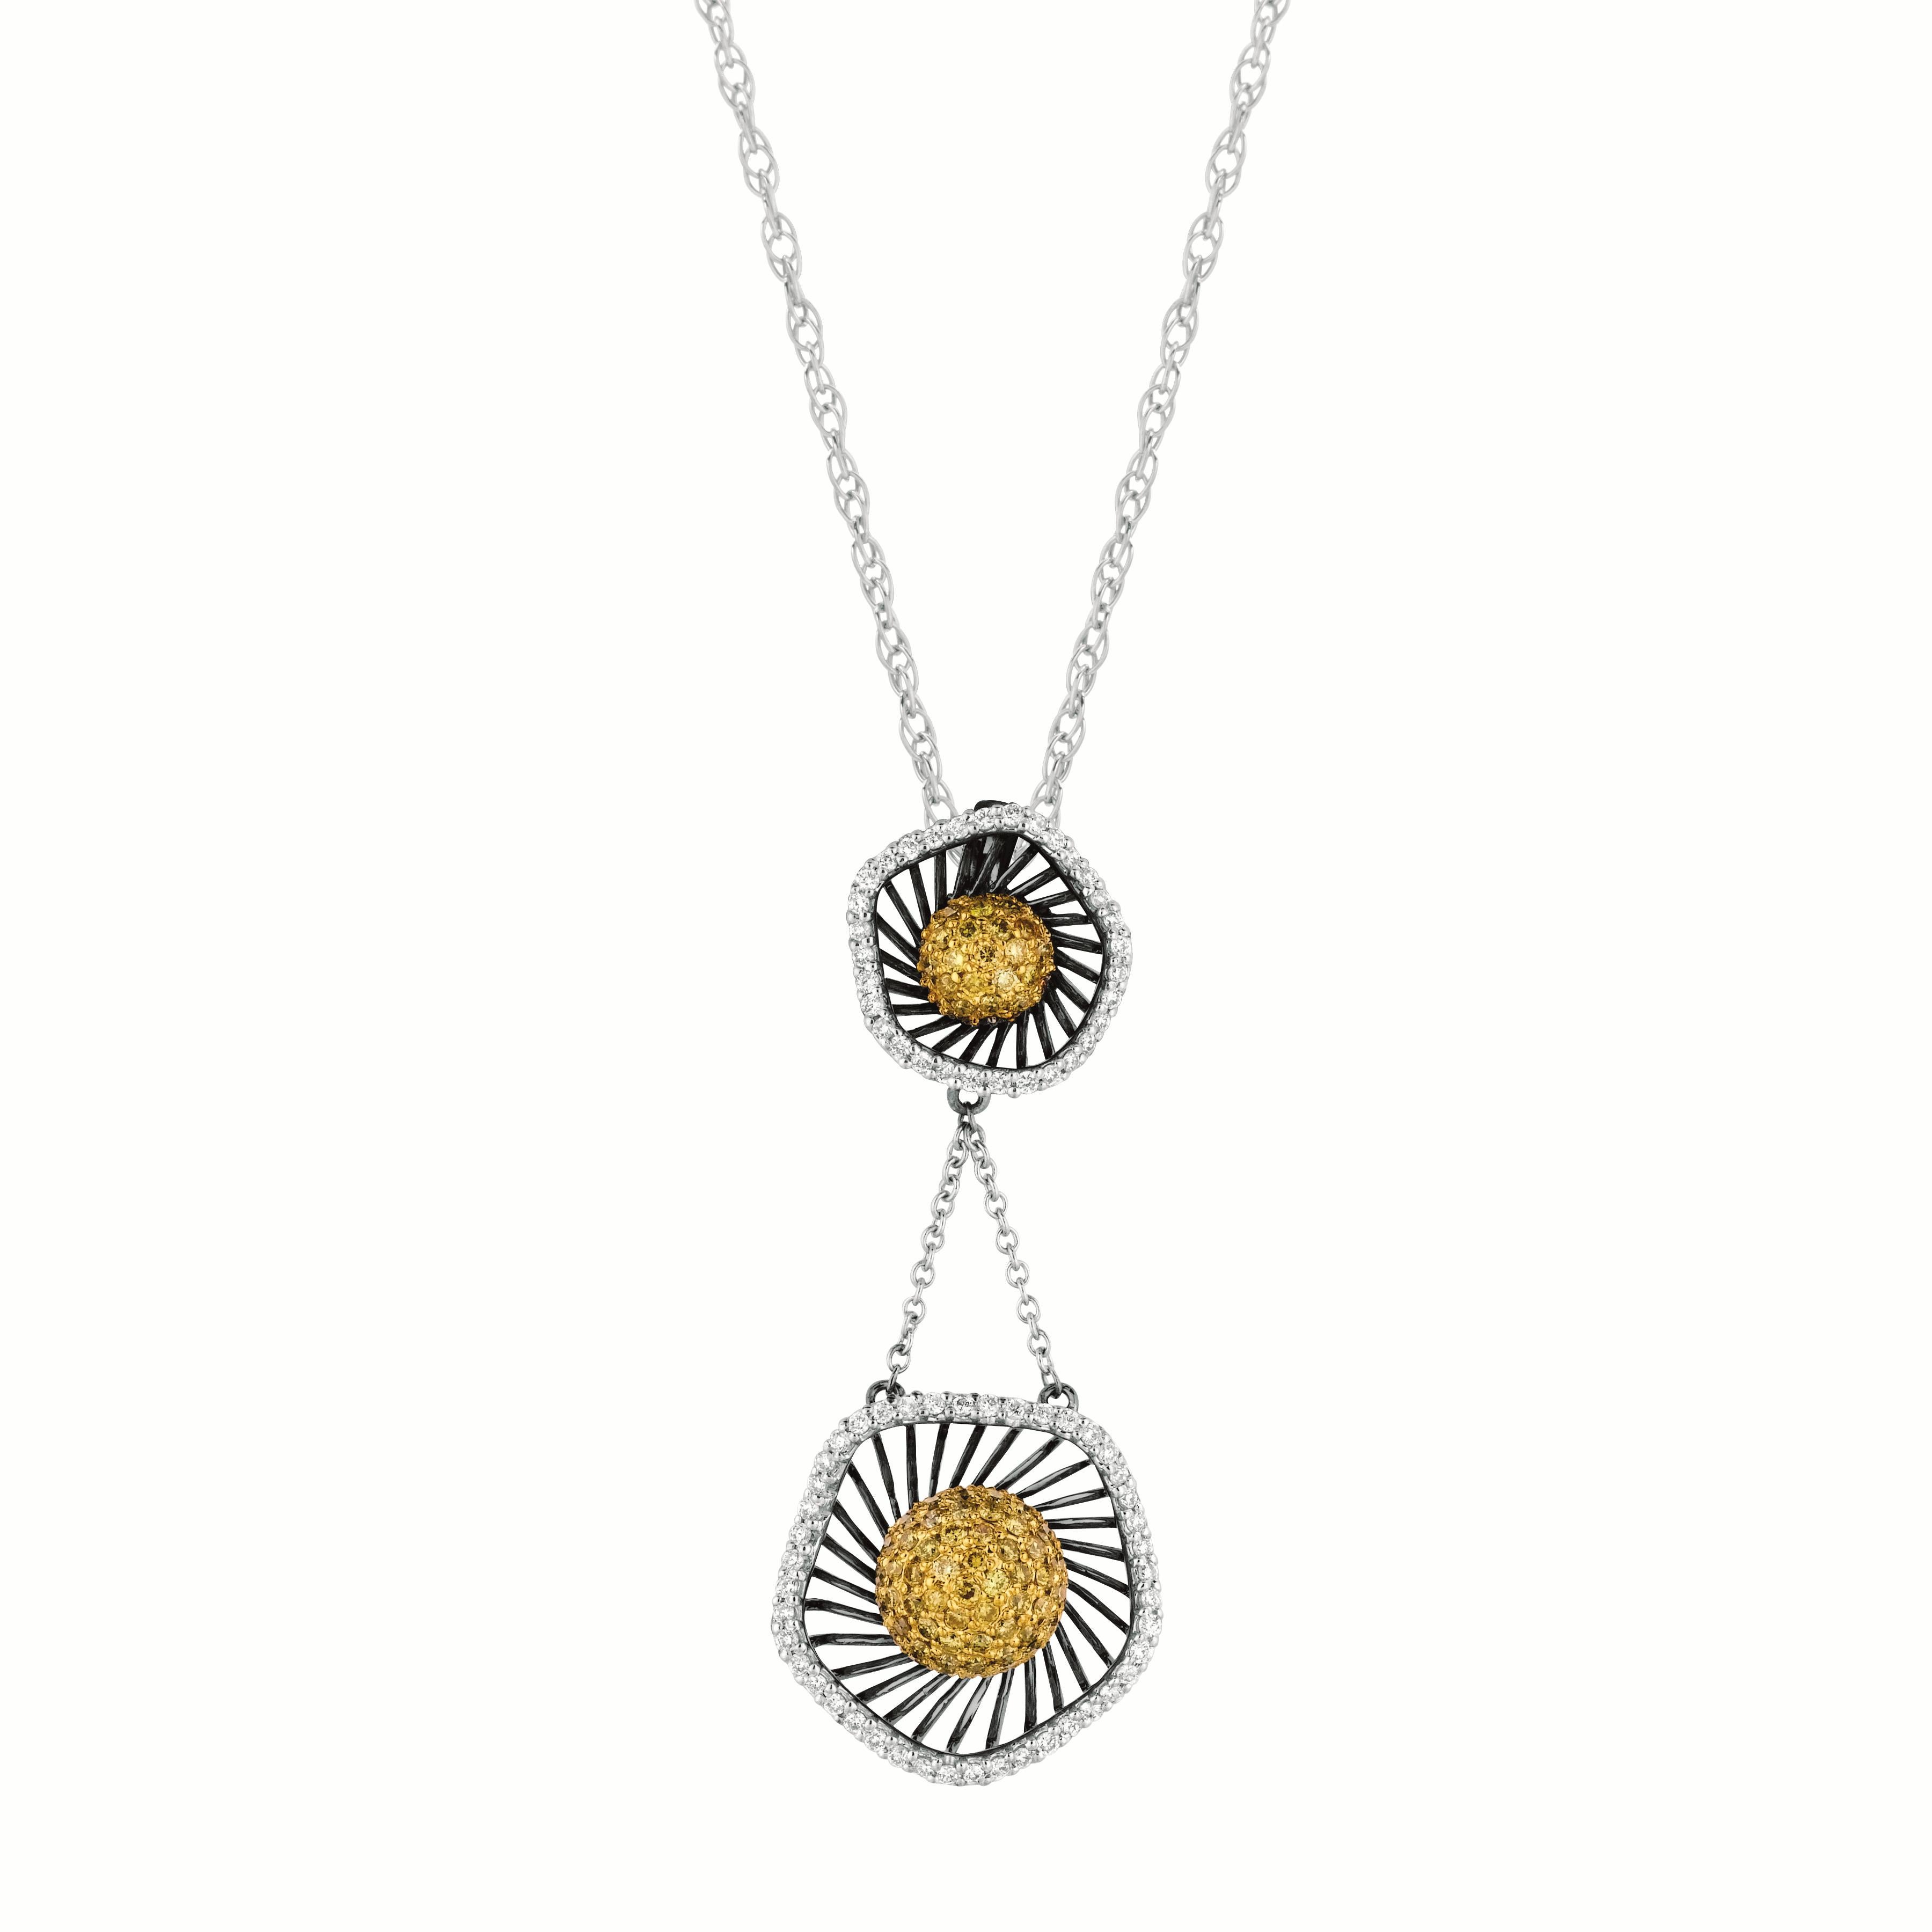 Elevate your style with this exquisite pendant showcasing 148 natural fancy brown and white diamonds. Crafted in 18k gold, this pendant offers a unique and lightweight design that will make a statement.

The combination of natural fancy brown and